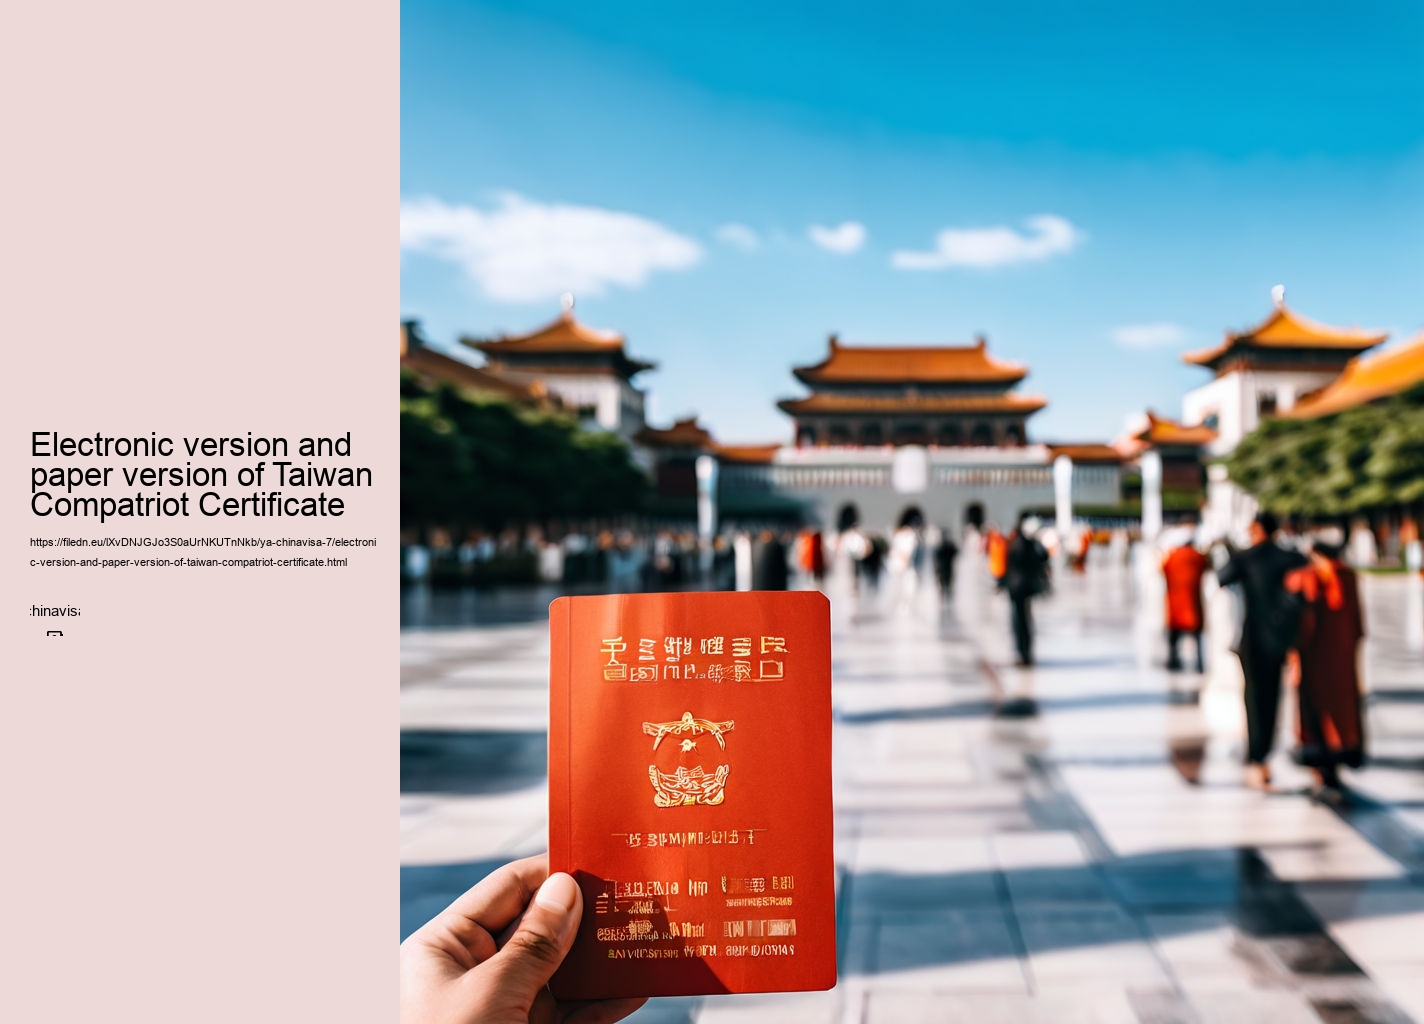 Electronic version and paper version of Taiwan Compatriot Certificate